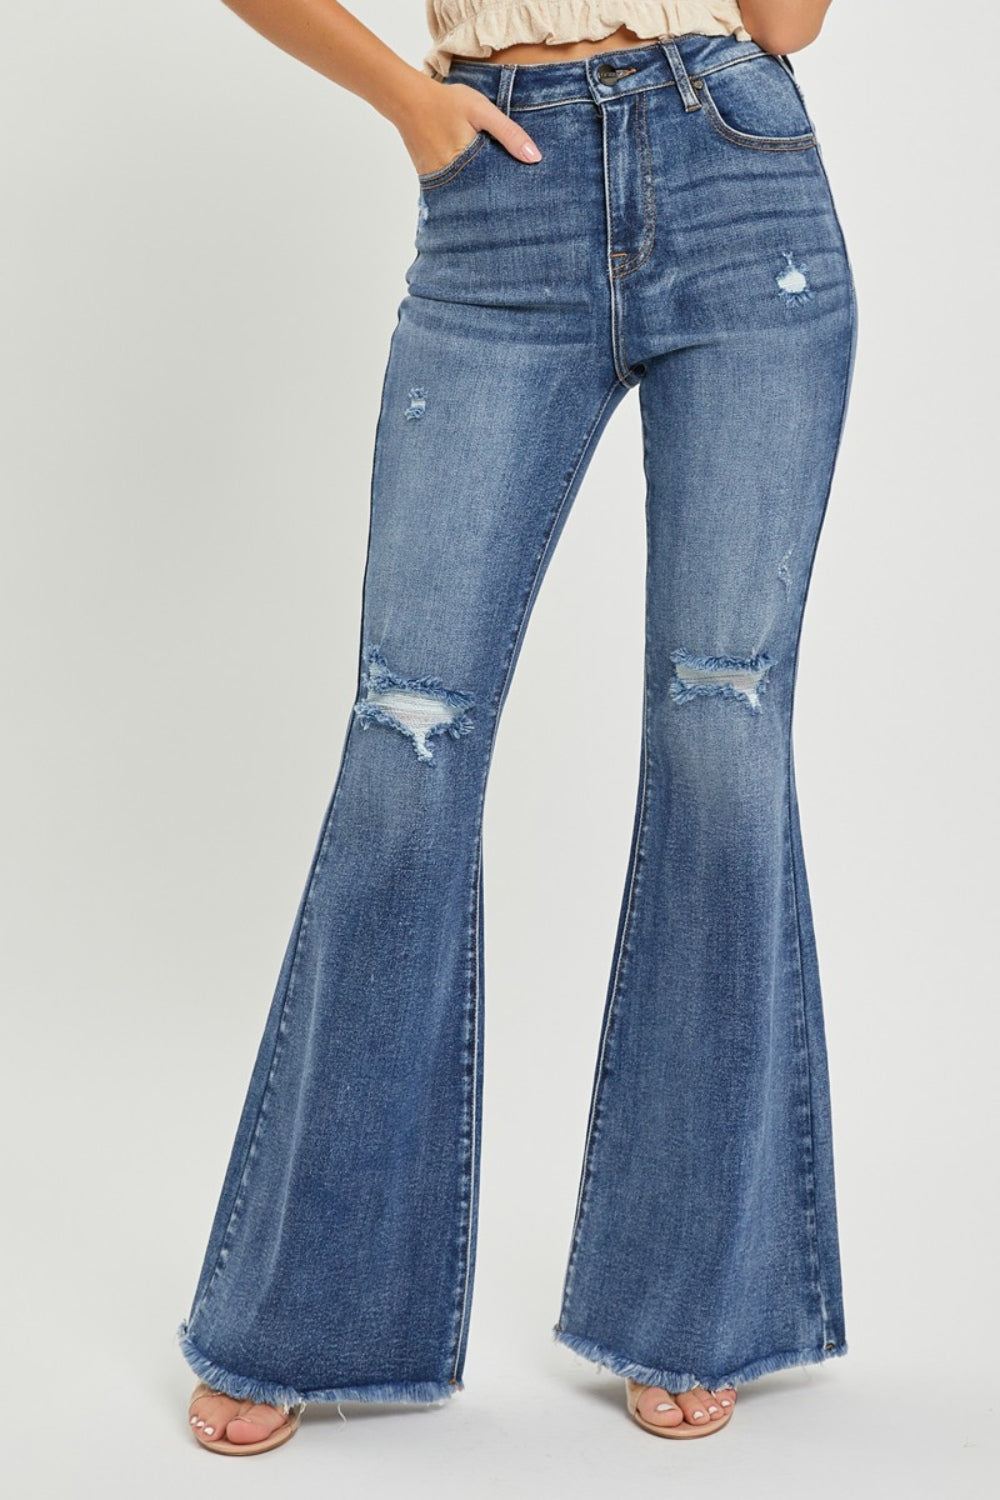 RISEN - High Waist Distressed Knee Flare Jeans - Inspired Eye Boutique